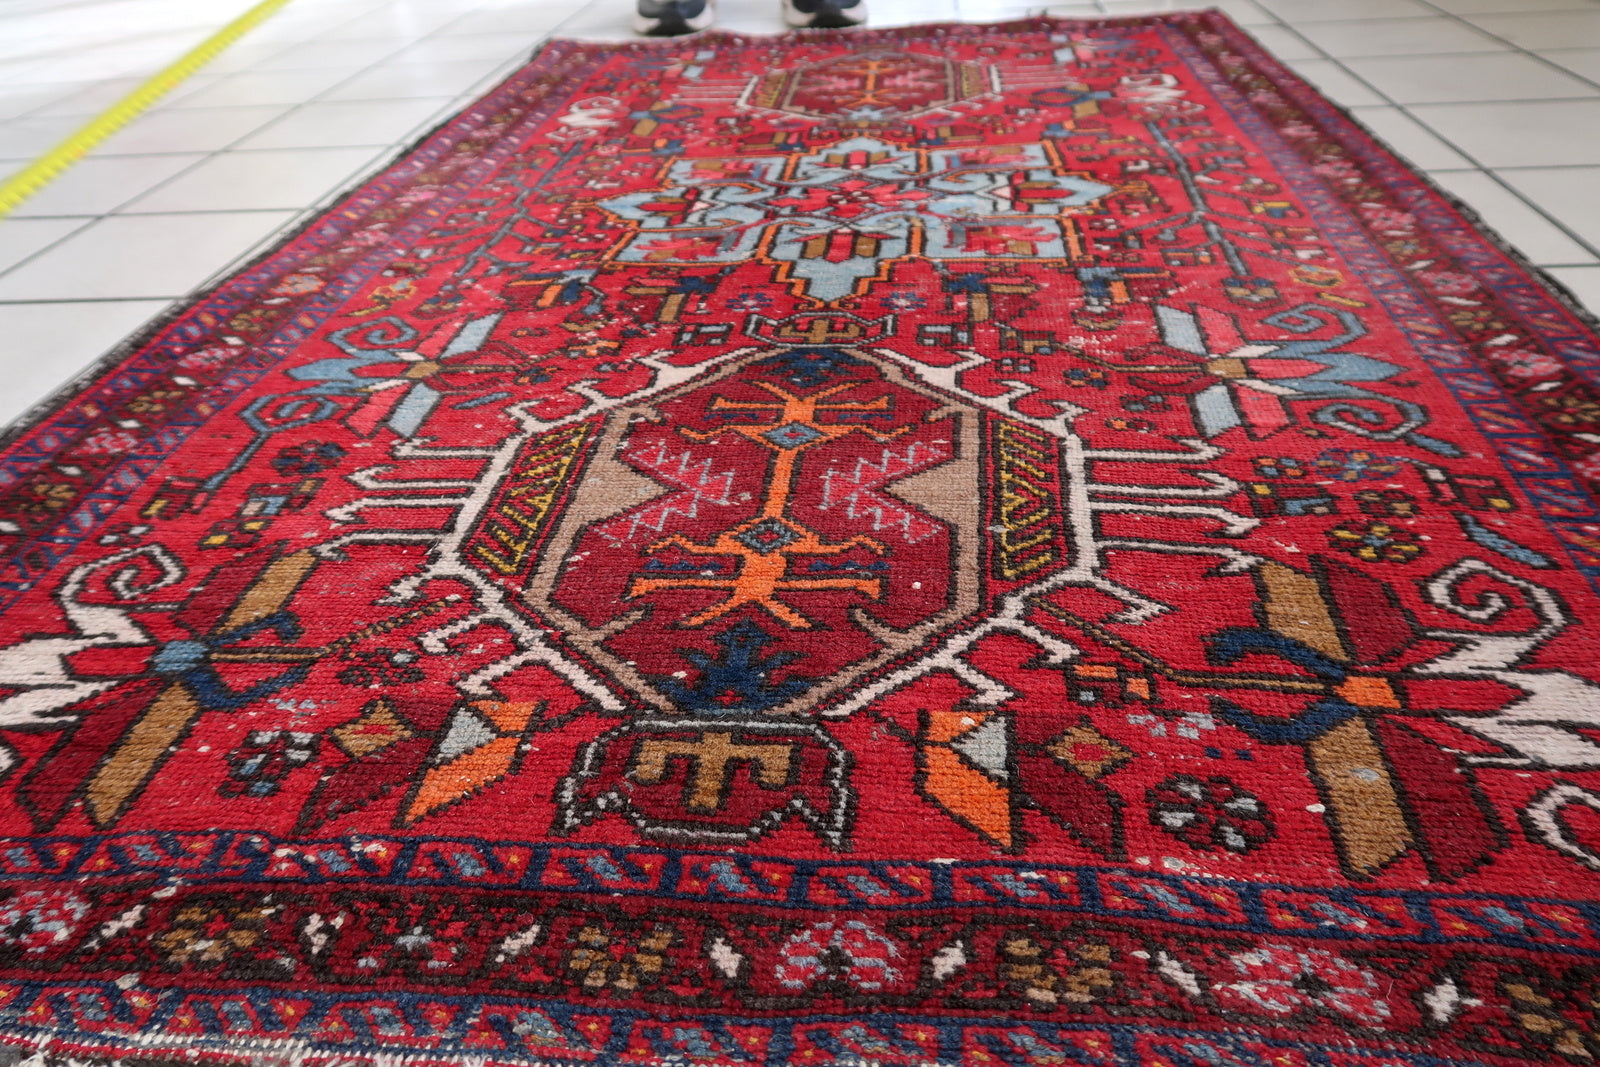 Rectangular Shape and Rich Red Base Color of Antique Persian Karajeh Rug - 1920s